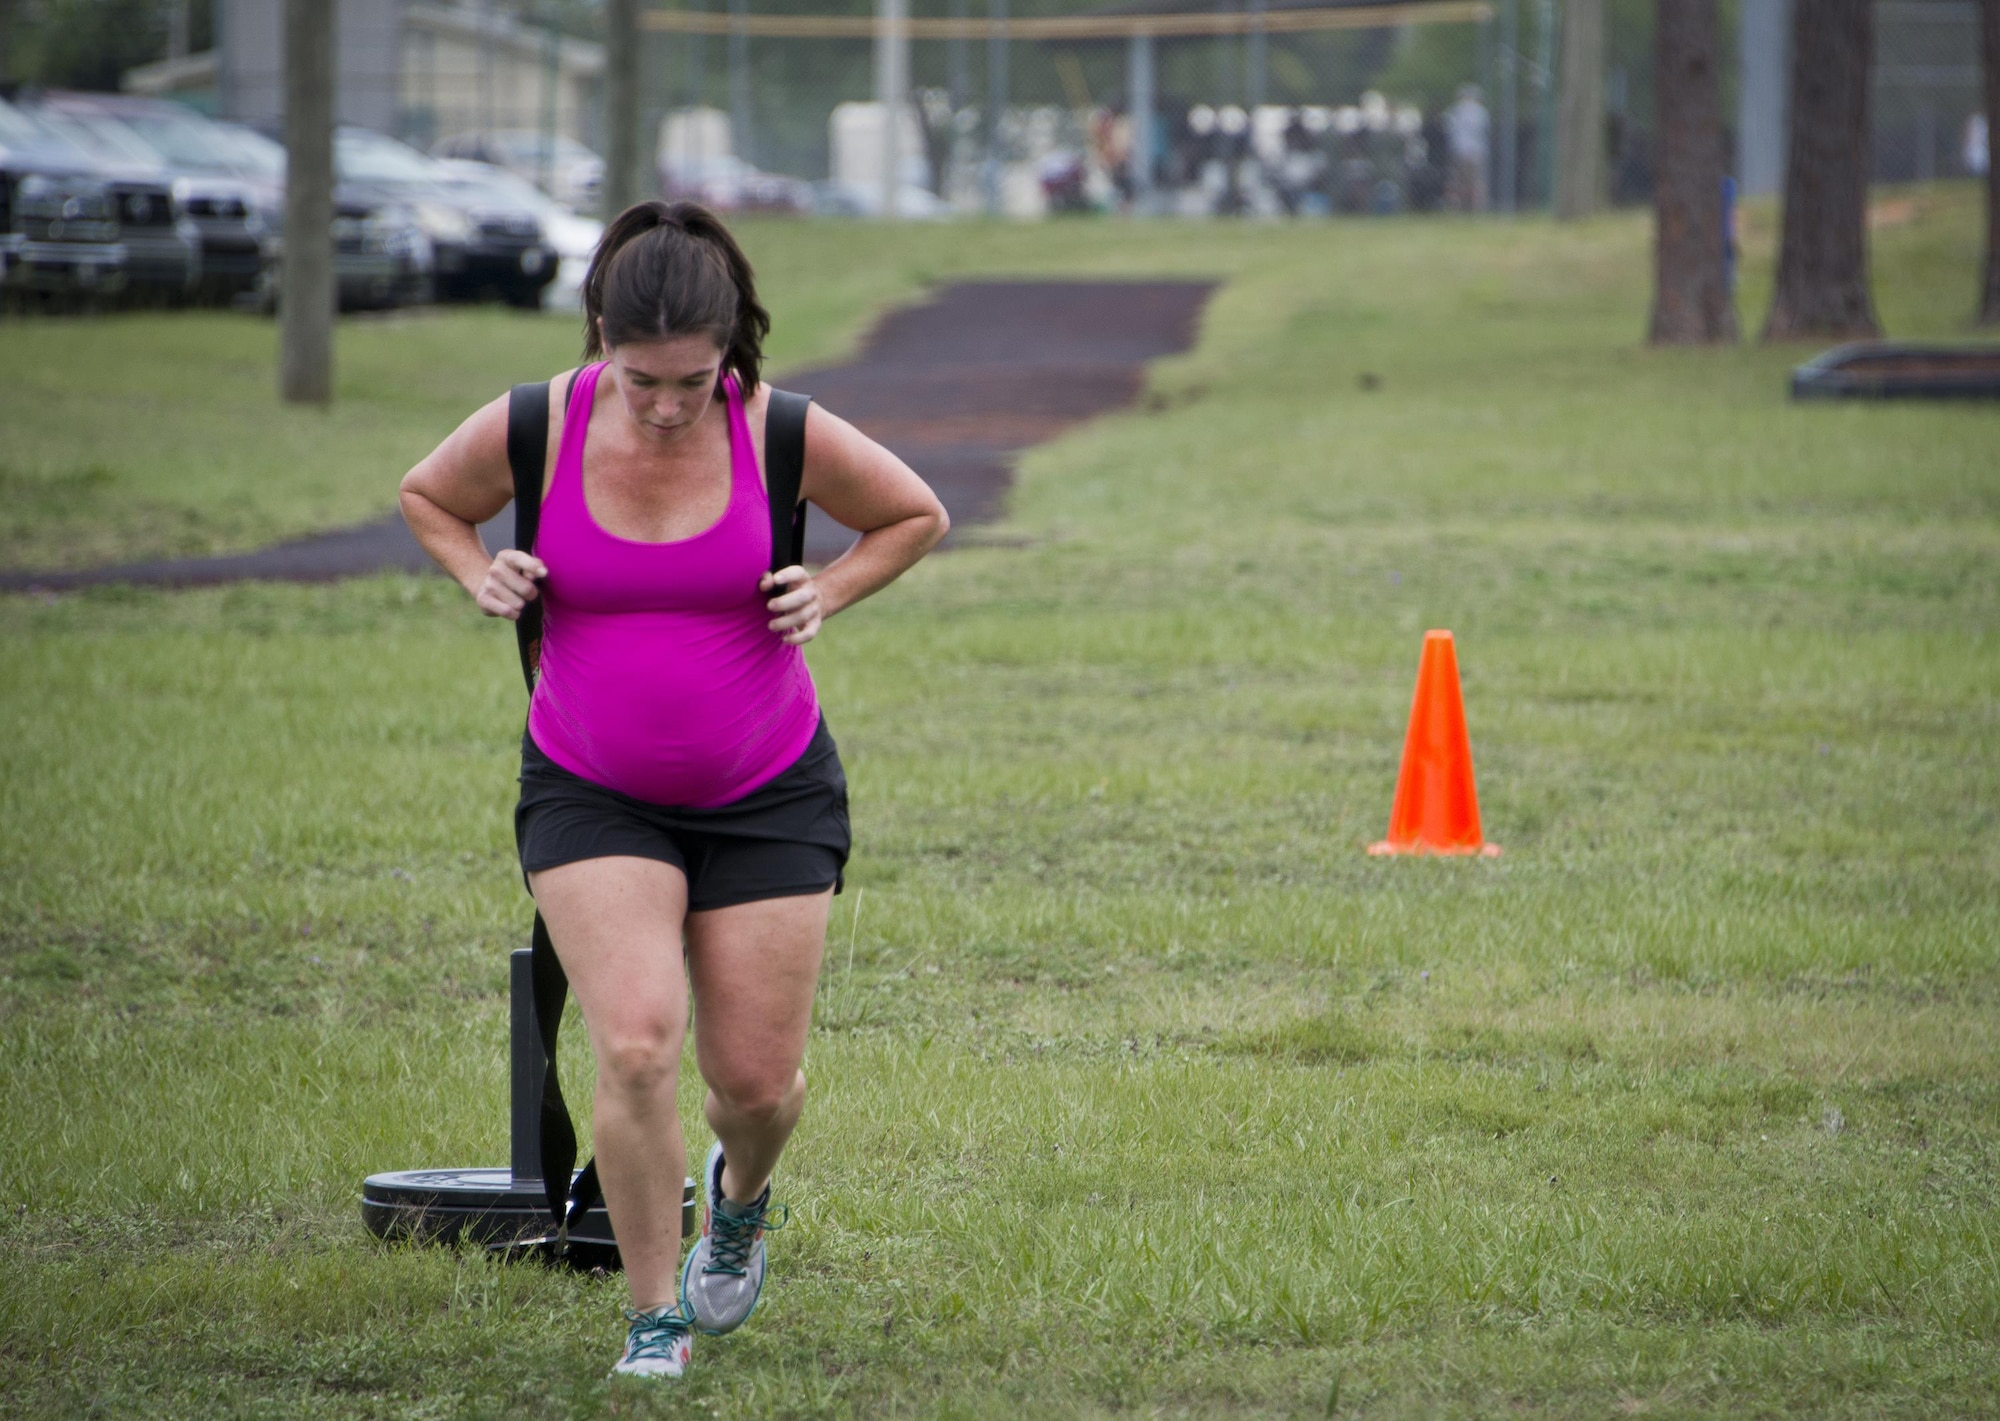 Tech. Sgt. Kristina Dean, 919th Special Operations Maintenance Group, pulls a weighted sled toward the finish line during a team combat fit competition June 11 at Duke Field, Fla.   Dean, a former fitness trainer, competed and completed all the challenges in the event while being six and a half months pregnant with her third child.  Her team went on to win the female competition. The three-round competition pushed the teams to their limits with repetitive weight lifting, rowing, sled-pulling and other kinetic activities.  (U.S. Air Force photo/Tech. Sgt. Sam King)